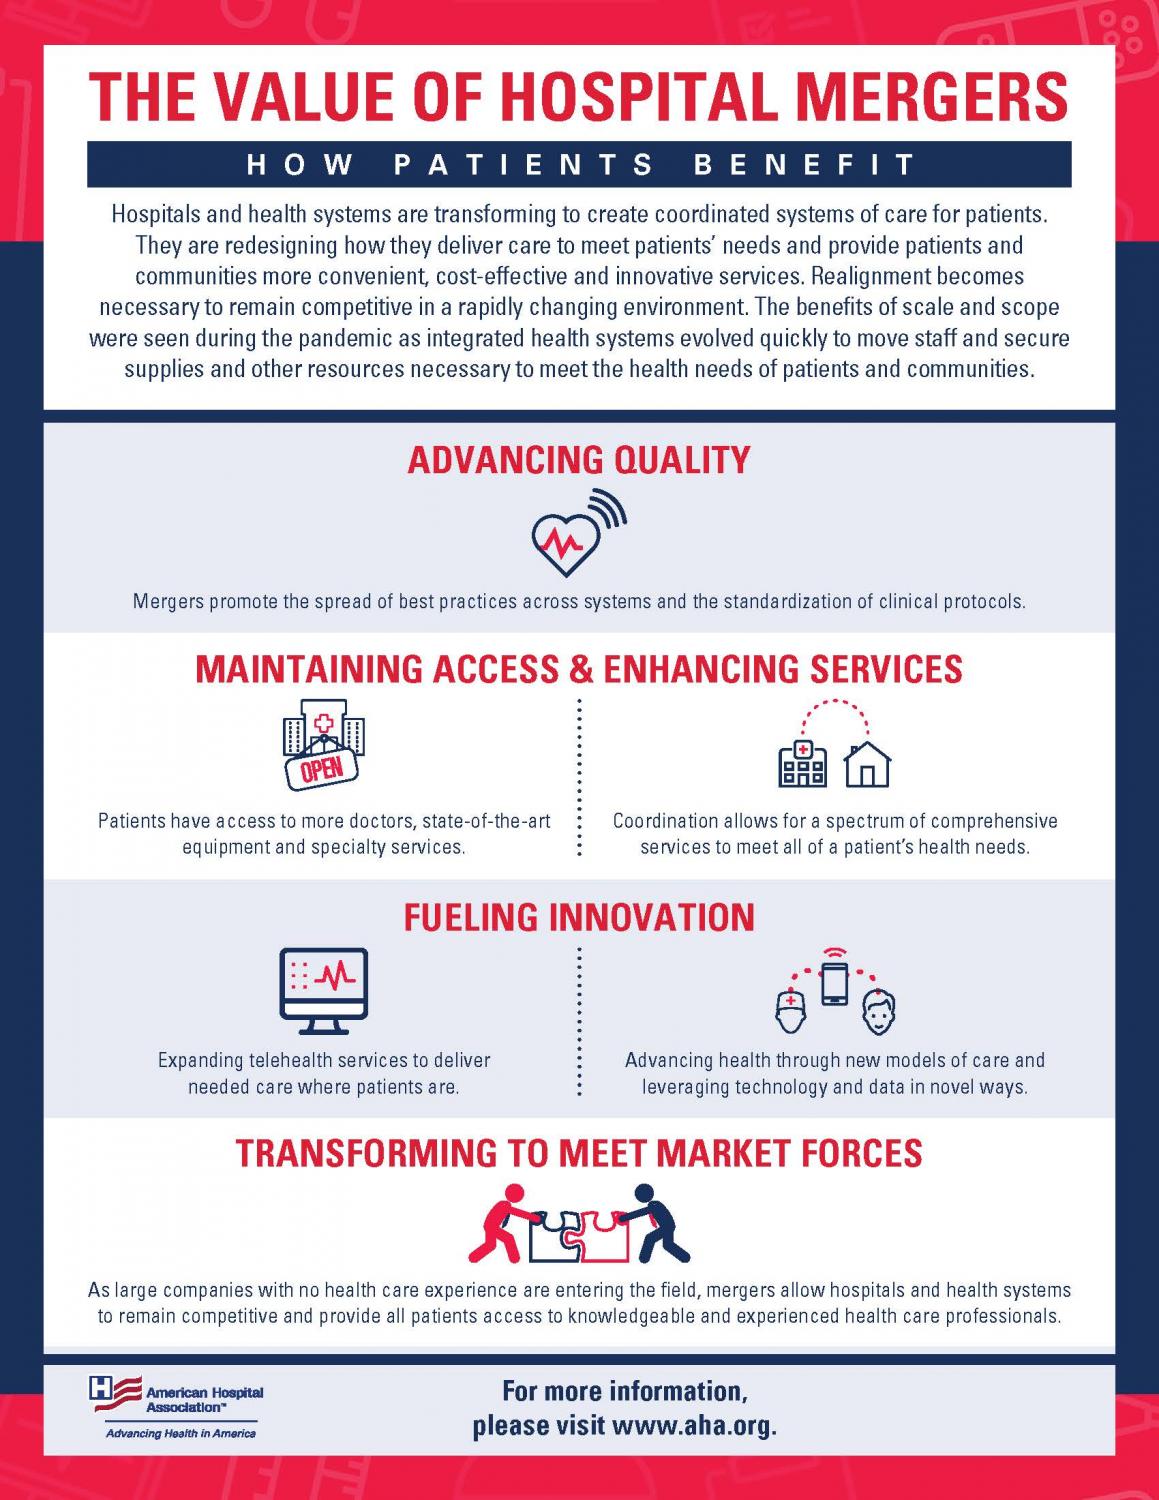 The Value of Hospital Mergers: How Patients Benefit Infographic. Hospitals and health systems are transforming to create coordinated systems of care for patients. They are redesigning how they deliver care to meet patients’ needs and provide patients and communities more convenient, cost-effective and innovative services. Realignment becomes necessary to remain competitive in a rapidly changing environment.